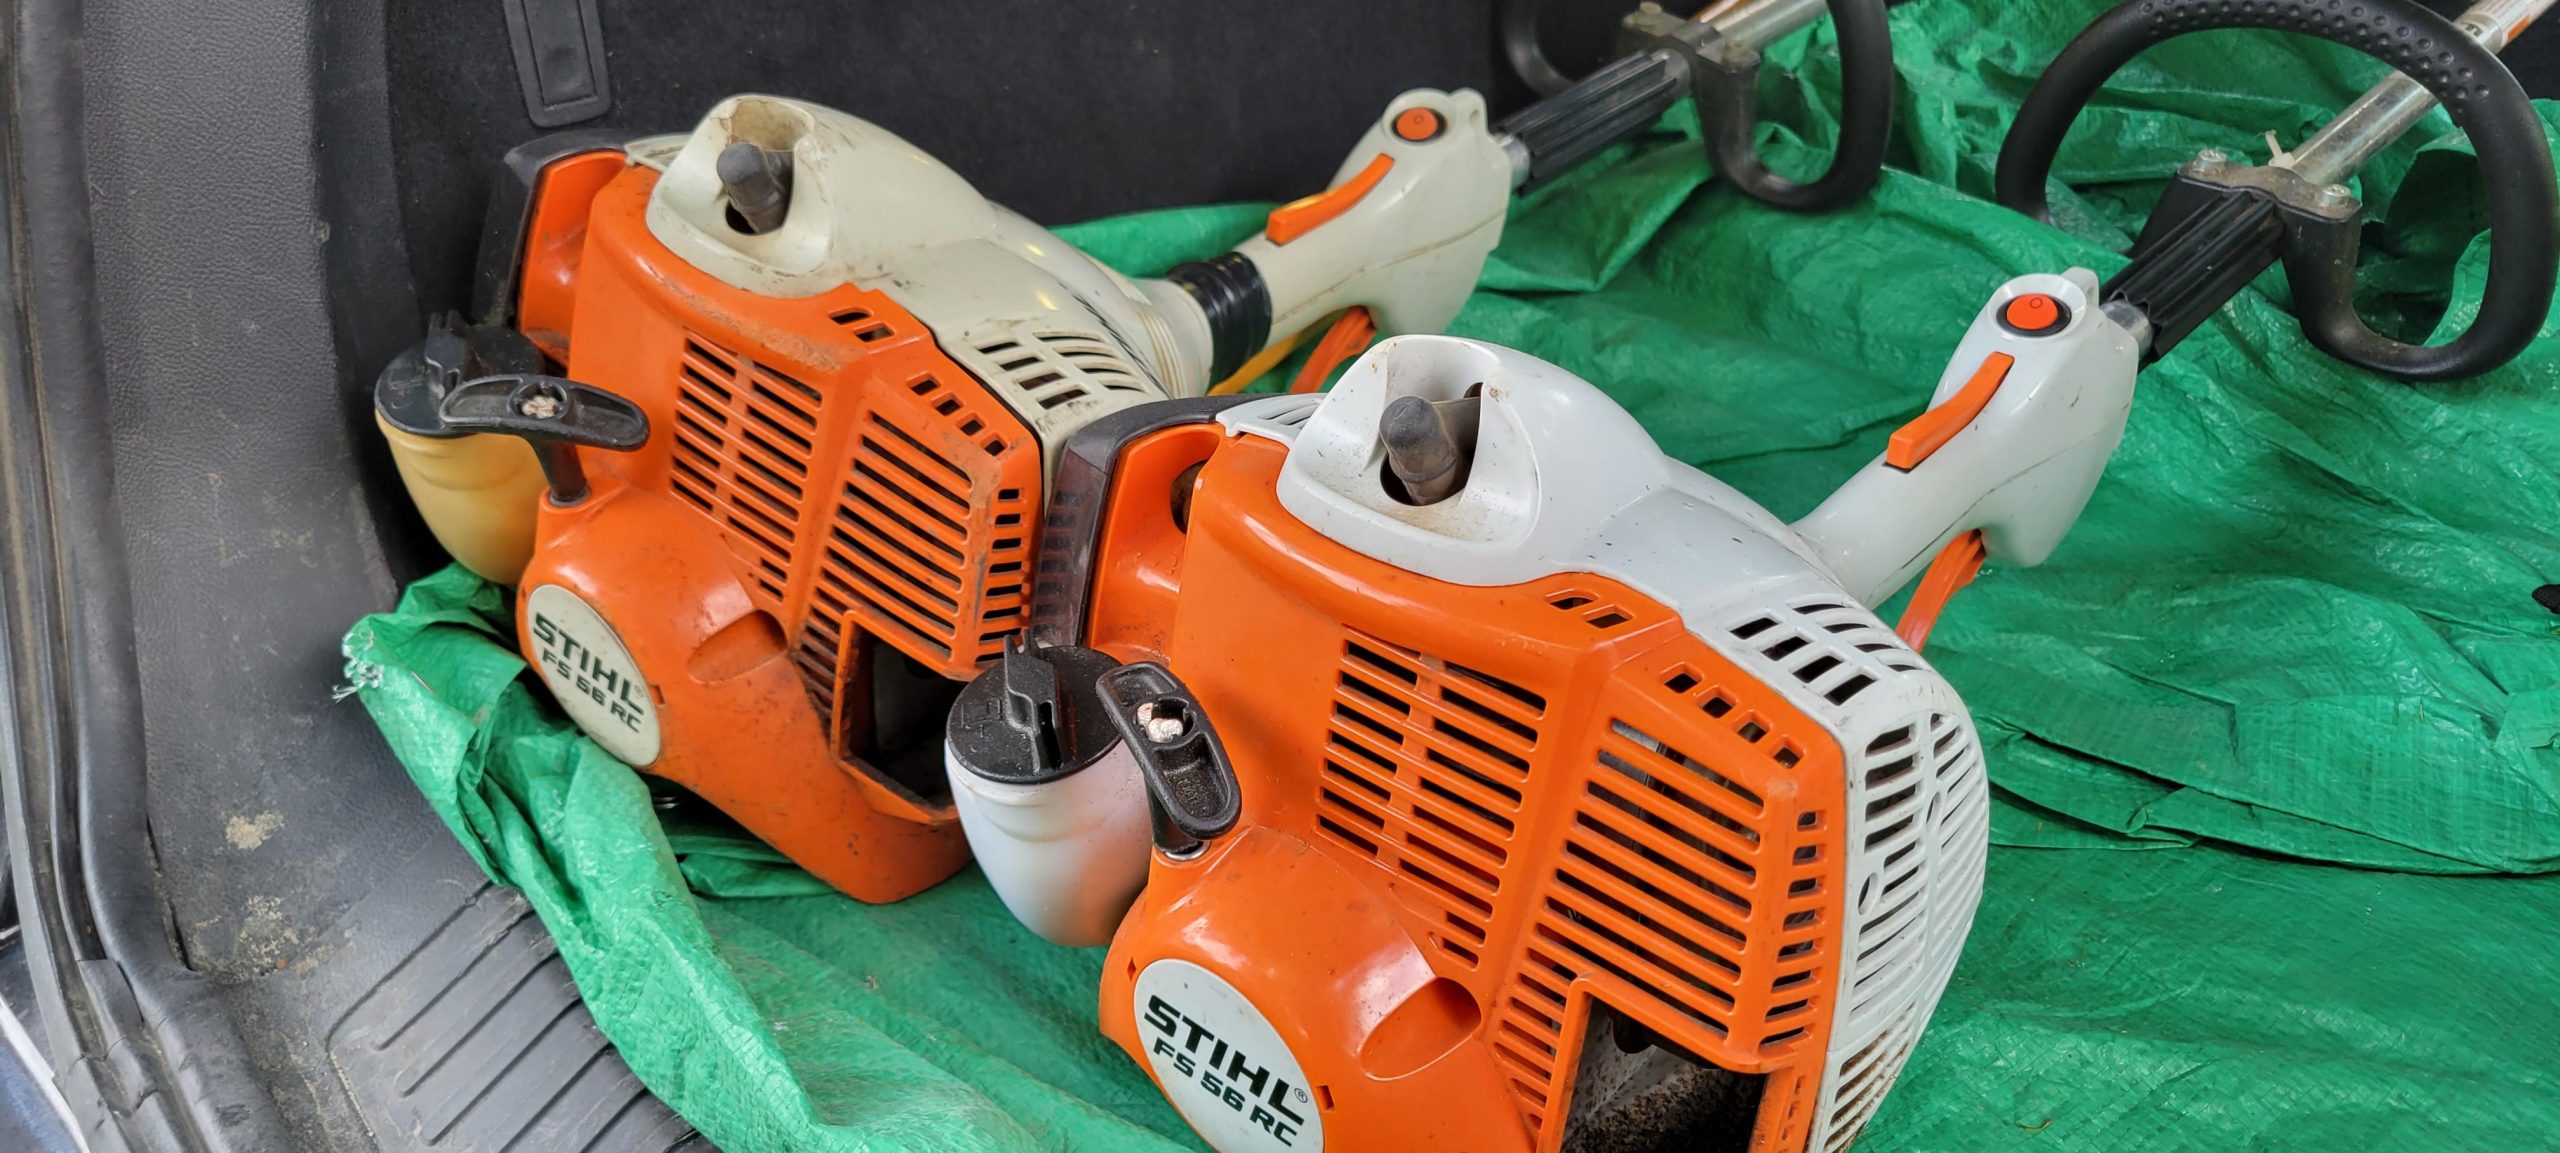 Is Echo Owned by Stihl